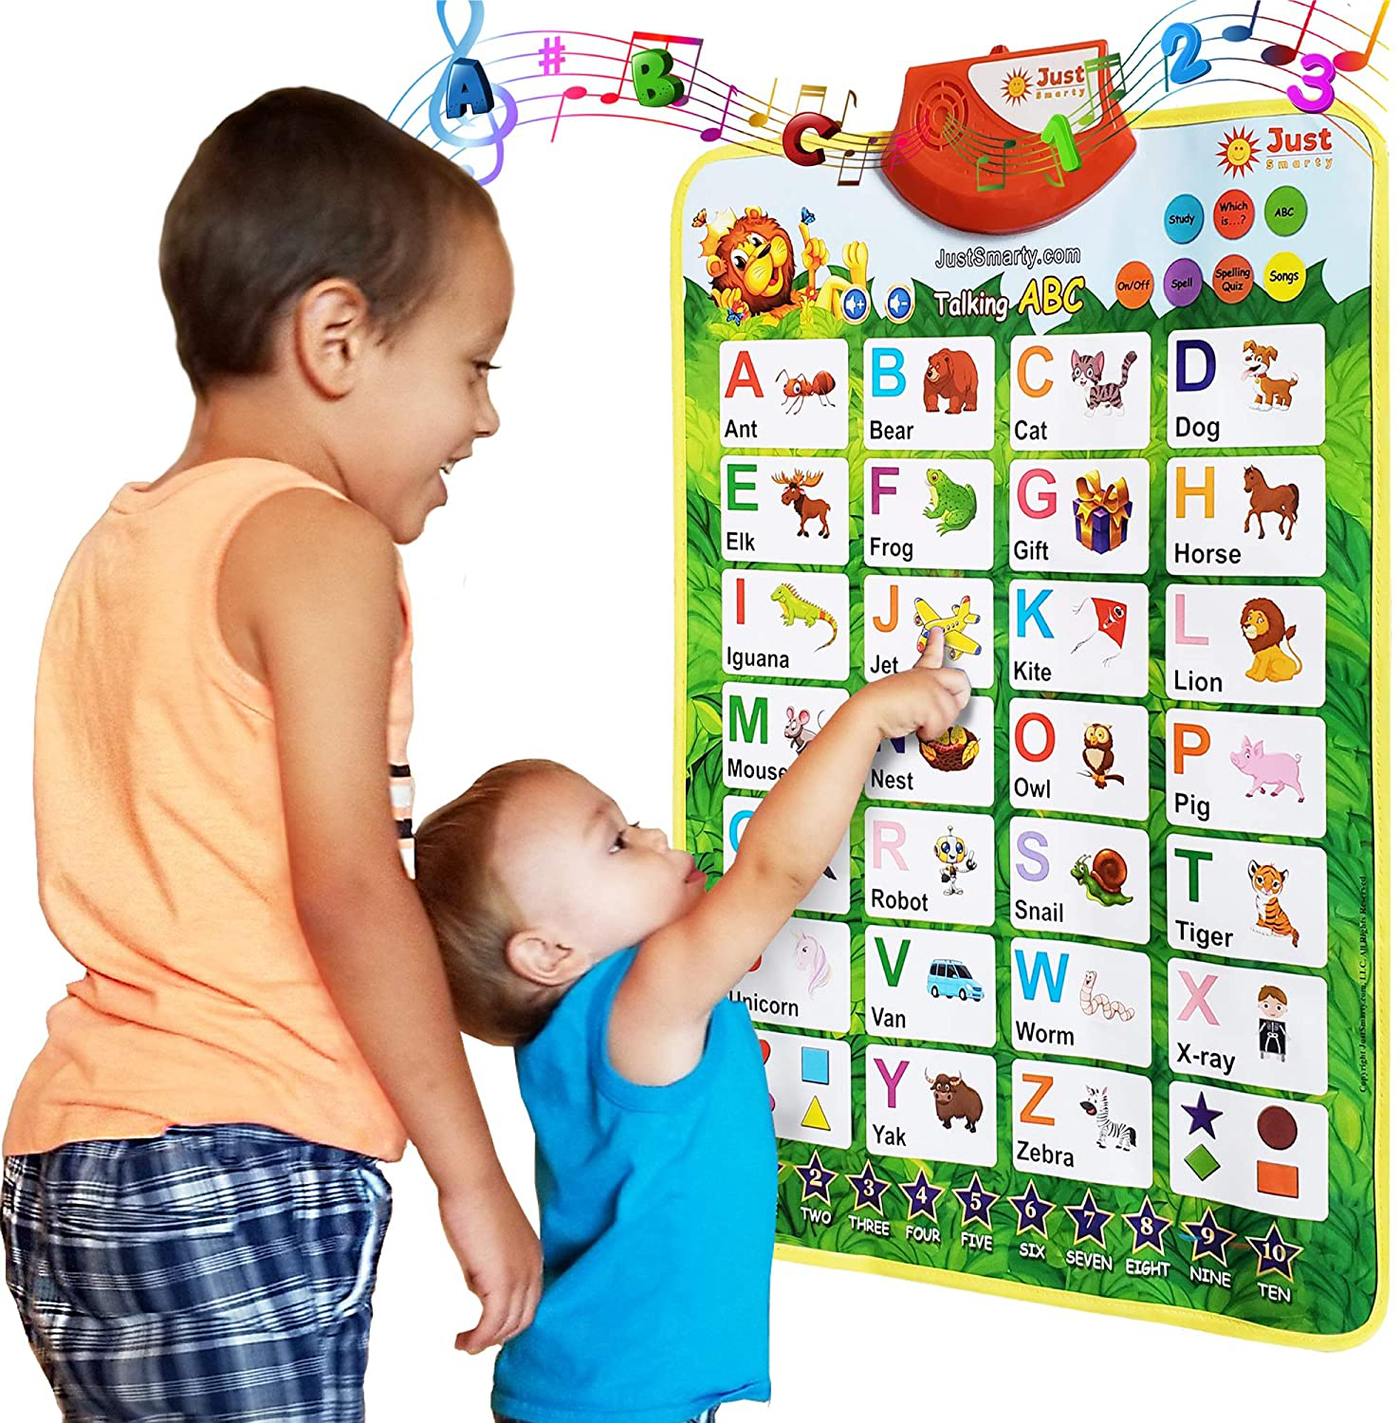 Just Smarty Interactive Dinosaurs Learning Poster, Includes 4 Dinosaur Figurines Kids Favorite Toys T-Rex, Spinosaurus, Triceratops and Brachiosaurus 7 Inches Each for Boys and Girls 3 and Up